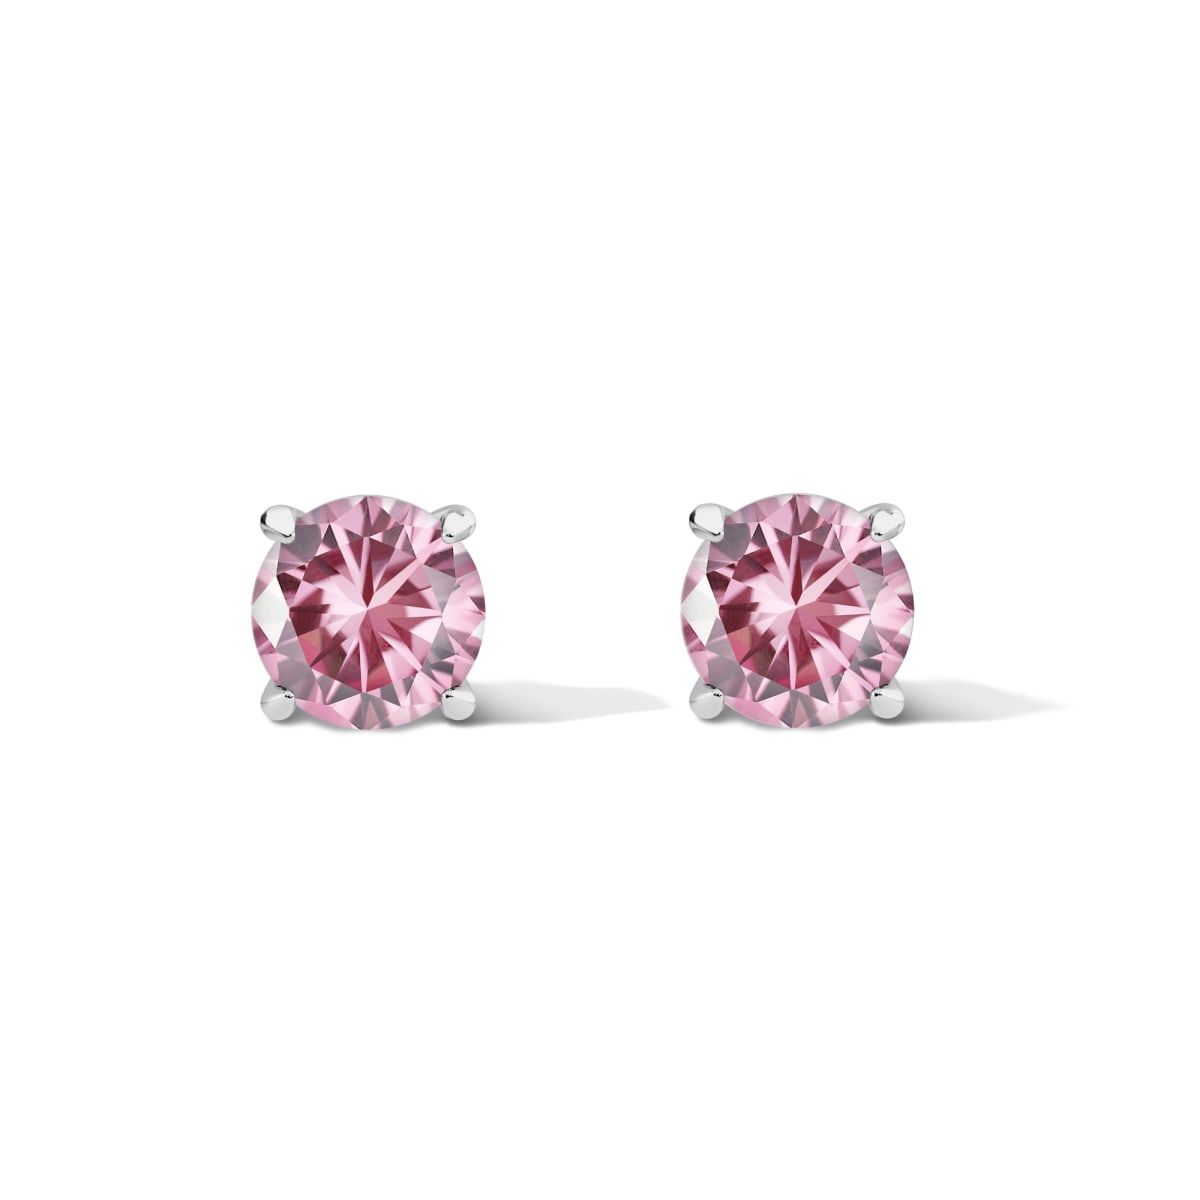 Round Cut Claw Prong Stud Earrings, Light Pink